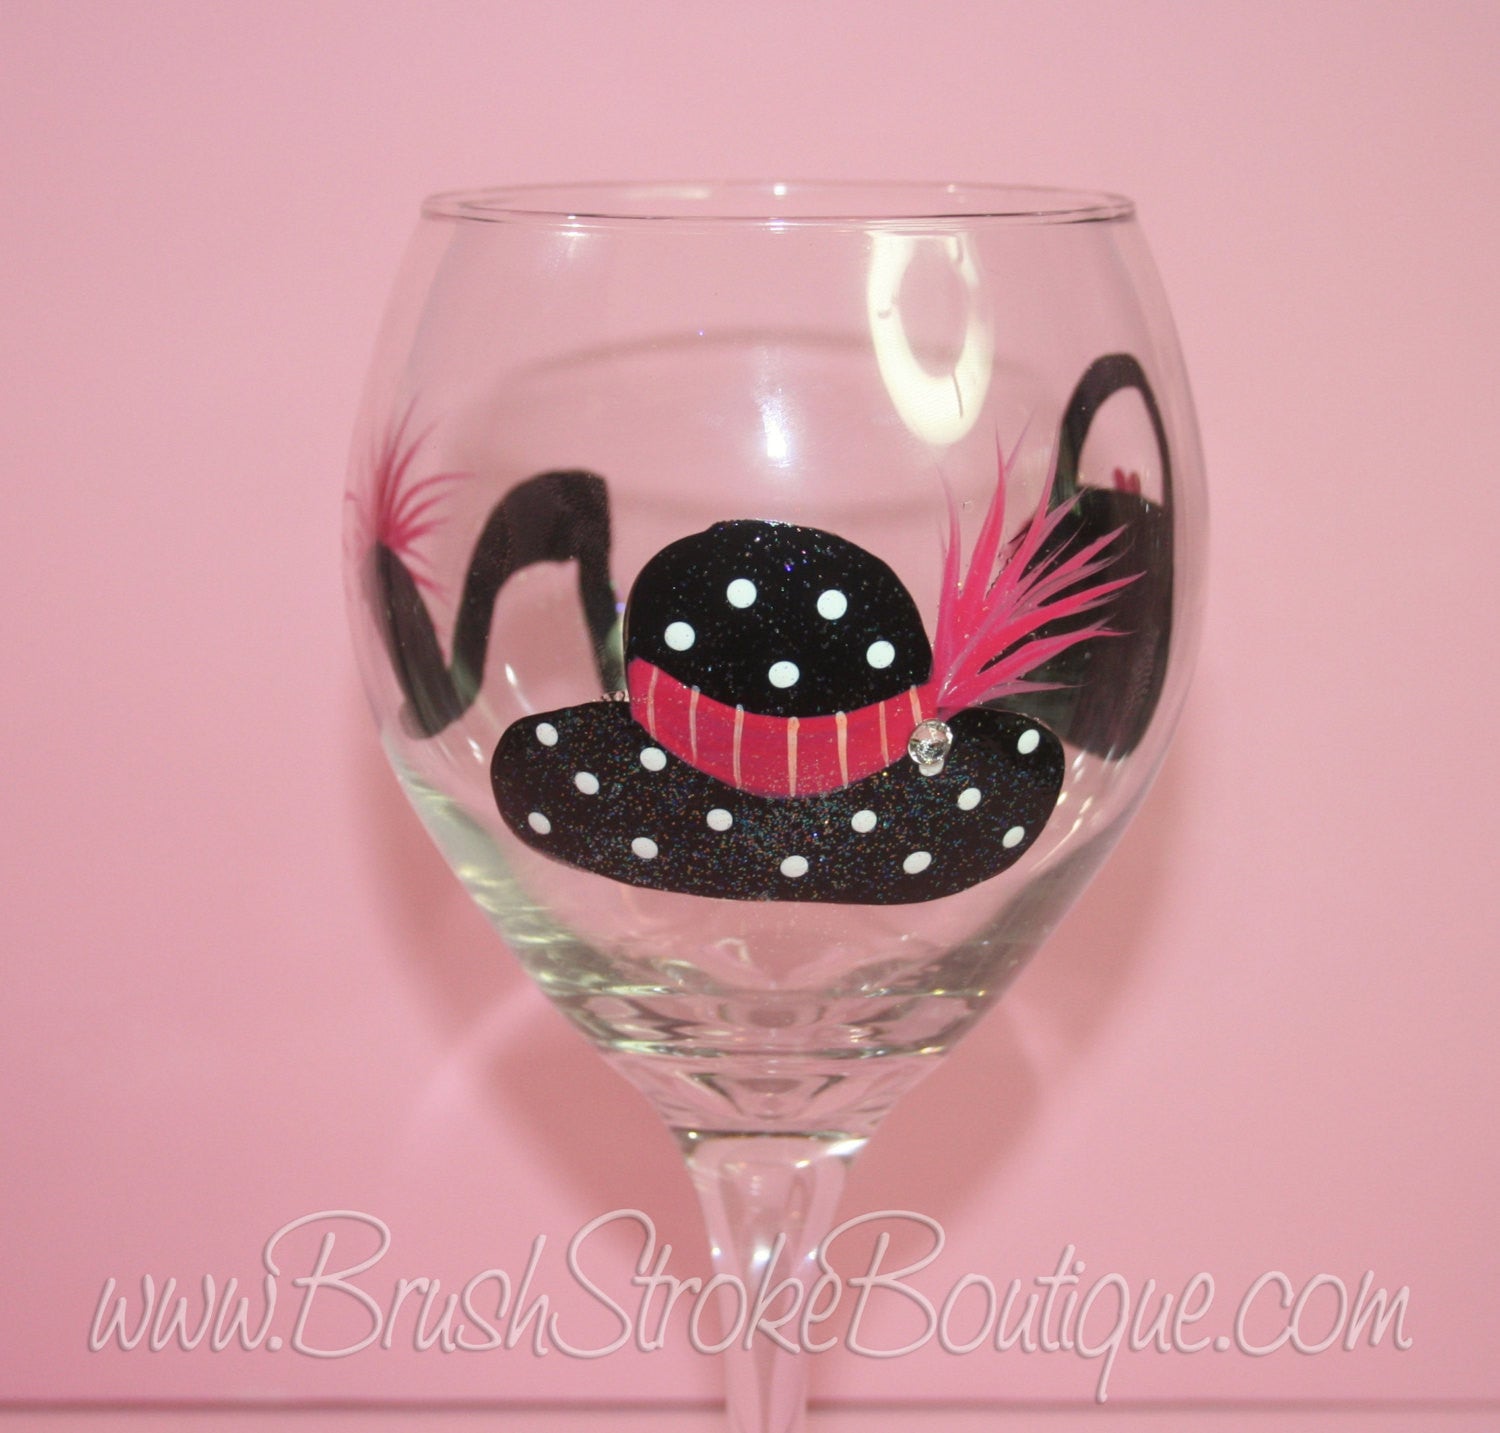 Hand Painted Wine Glass - Catching Snowflakes - Original Designs by Cathy  Kraemer